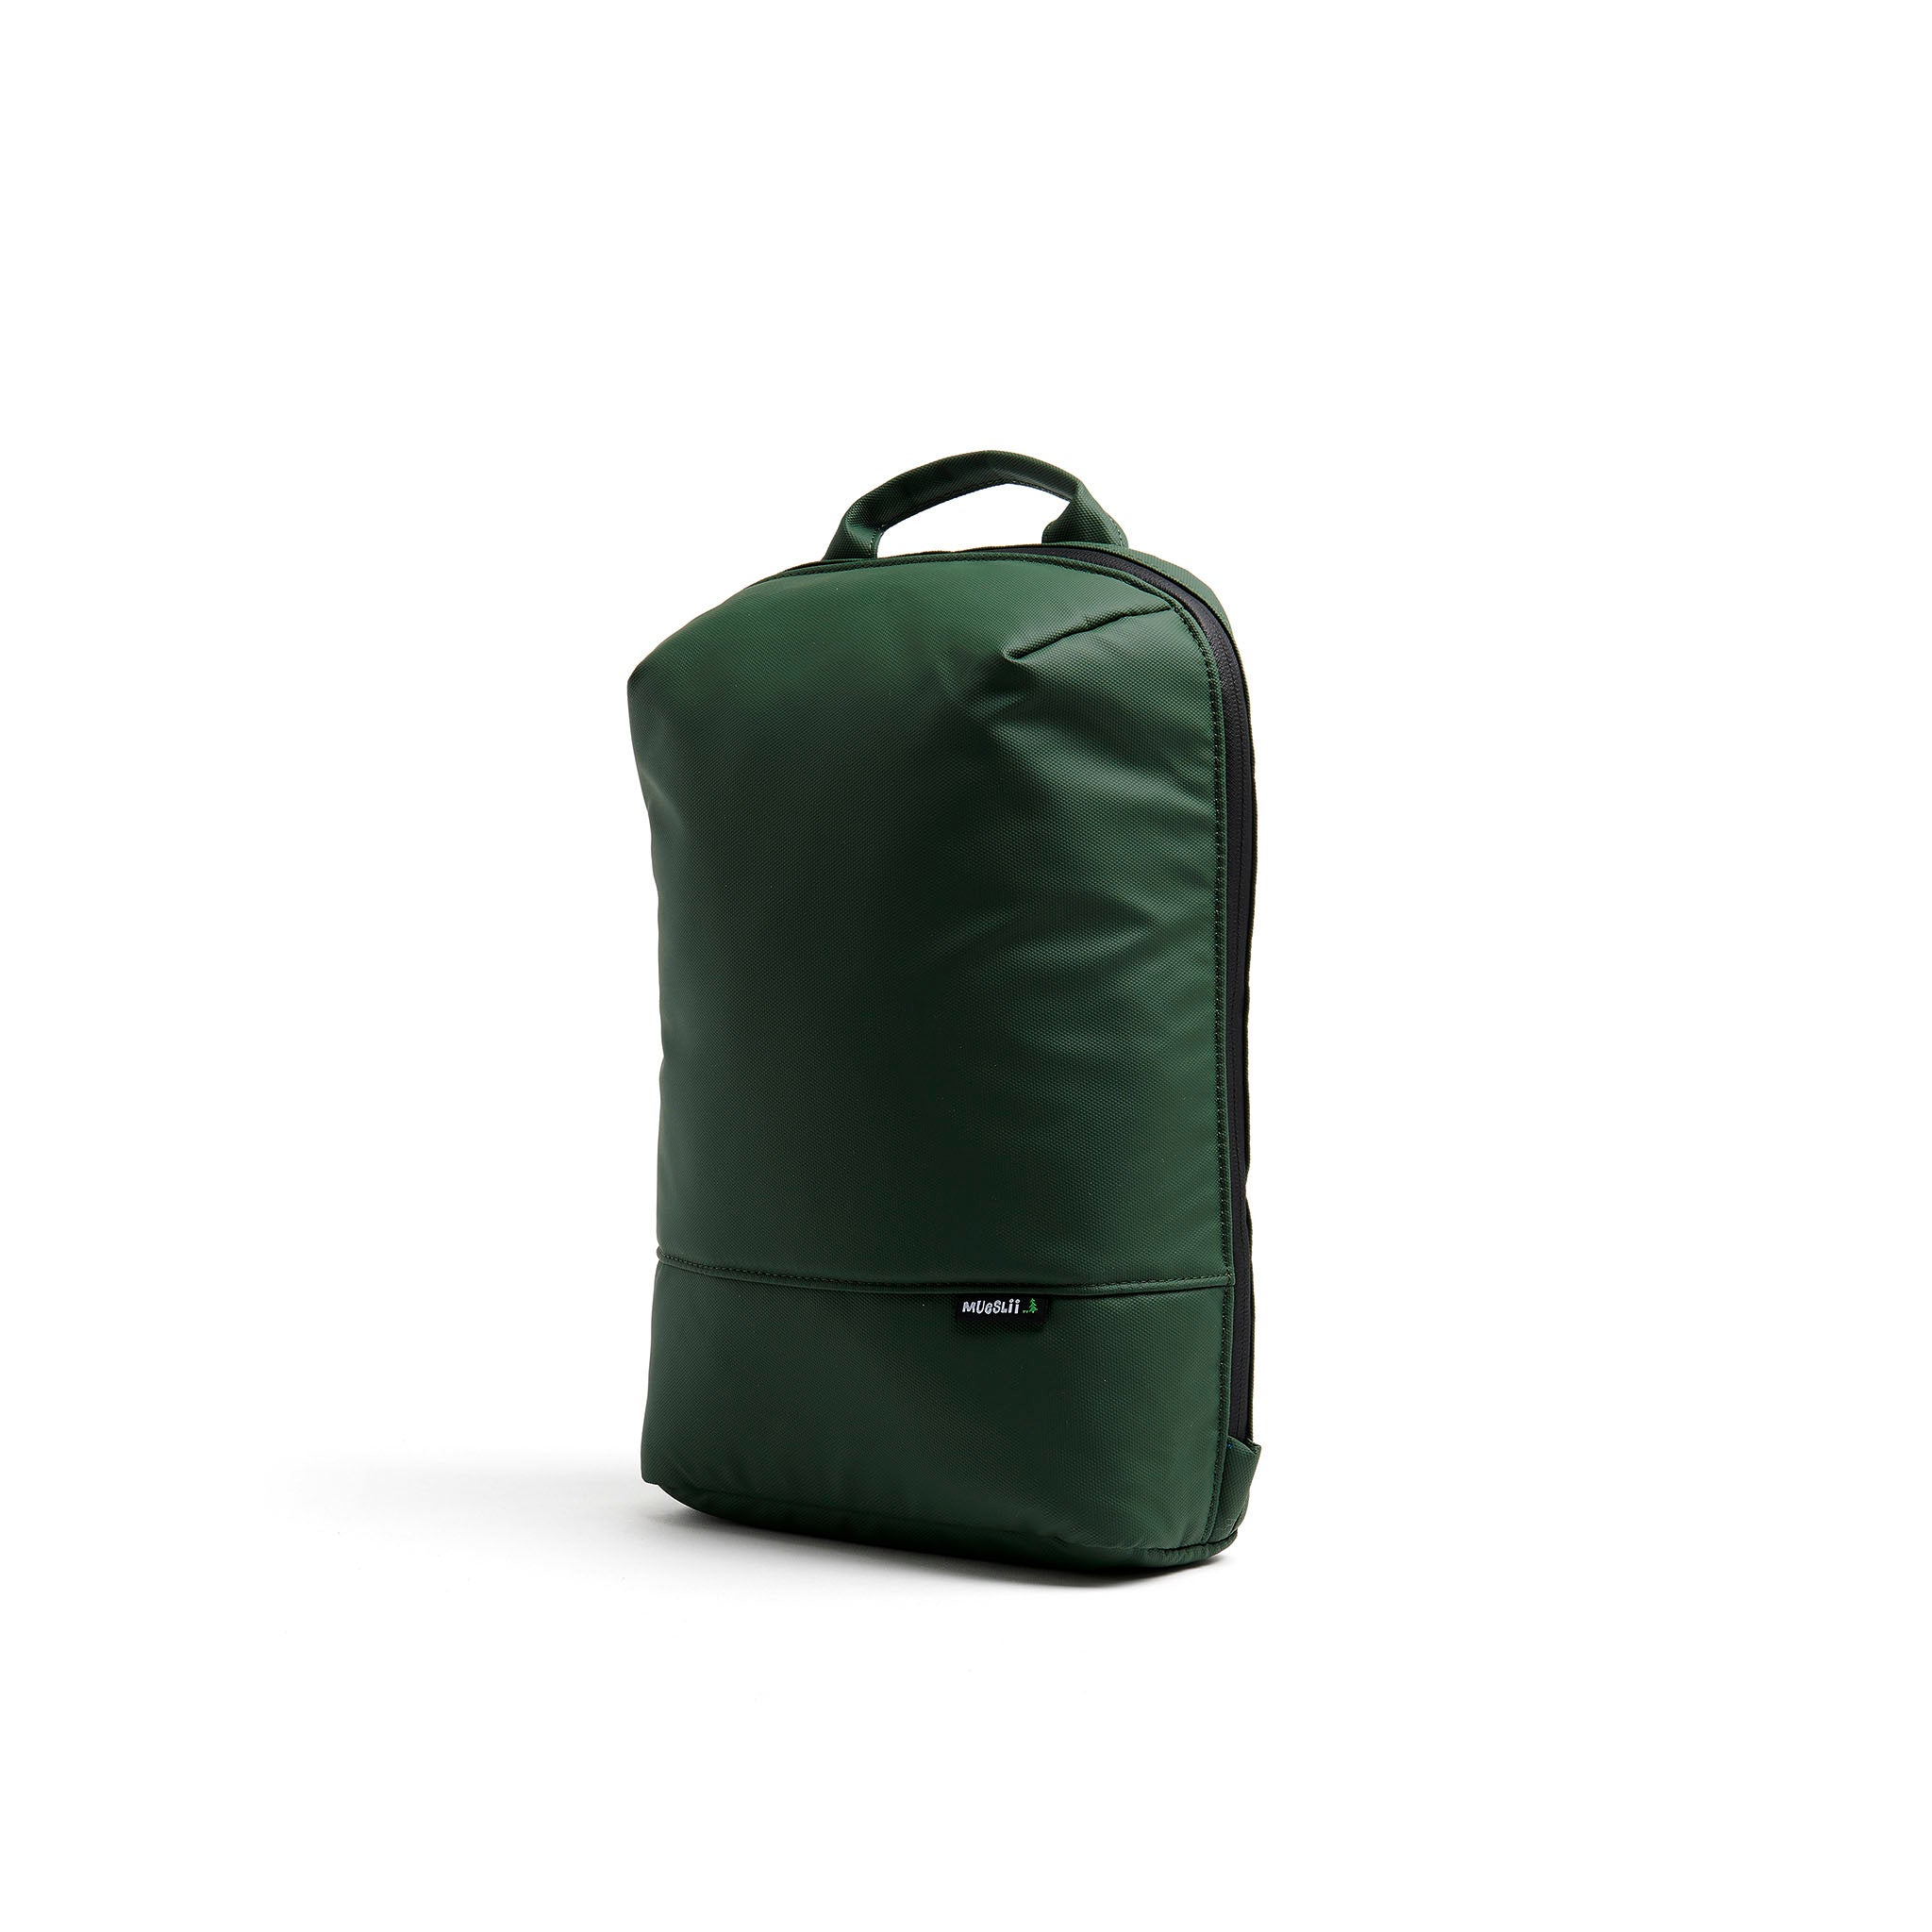 Mueslii small backpack, made of PU coated waterproof nylon, with a laptop compartment, color green, side view.